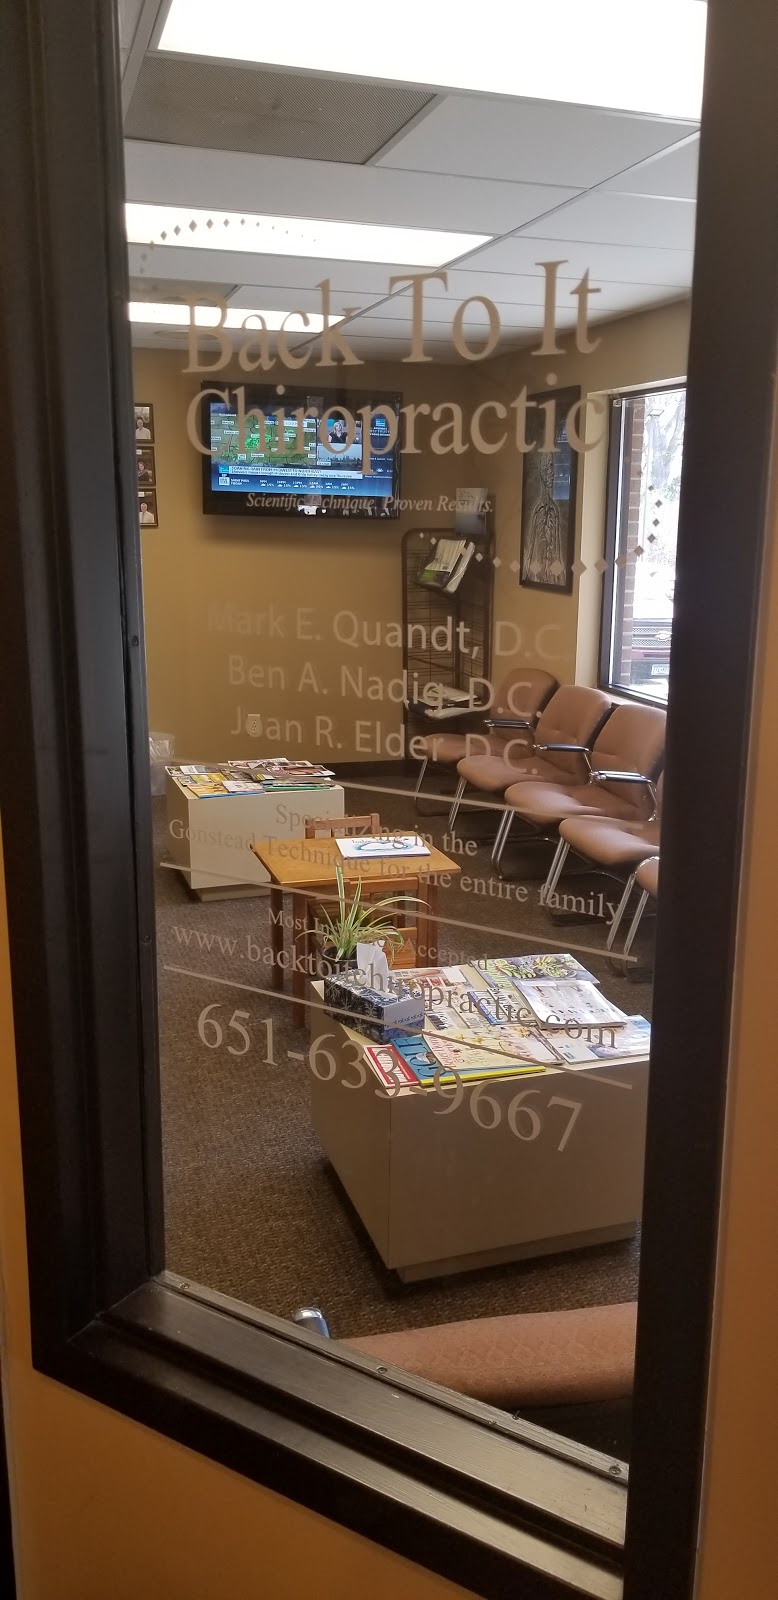 Back To It Chiropractic | 1260 County Rd E suite b, Arden Hills, MN 55112 | Phone: (651) 633-9667